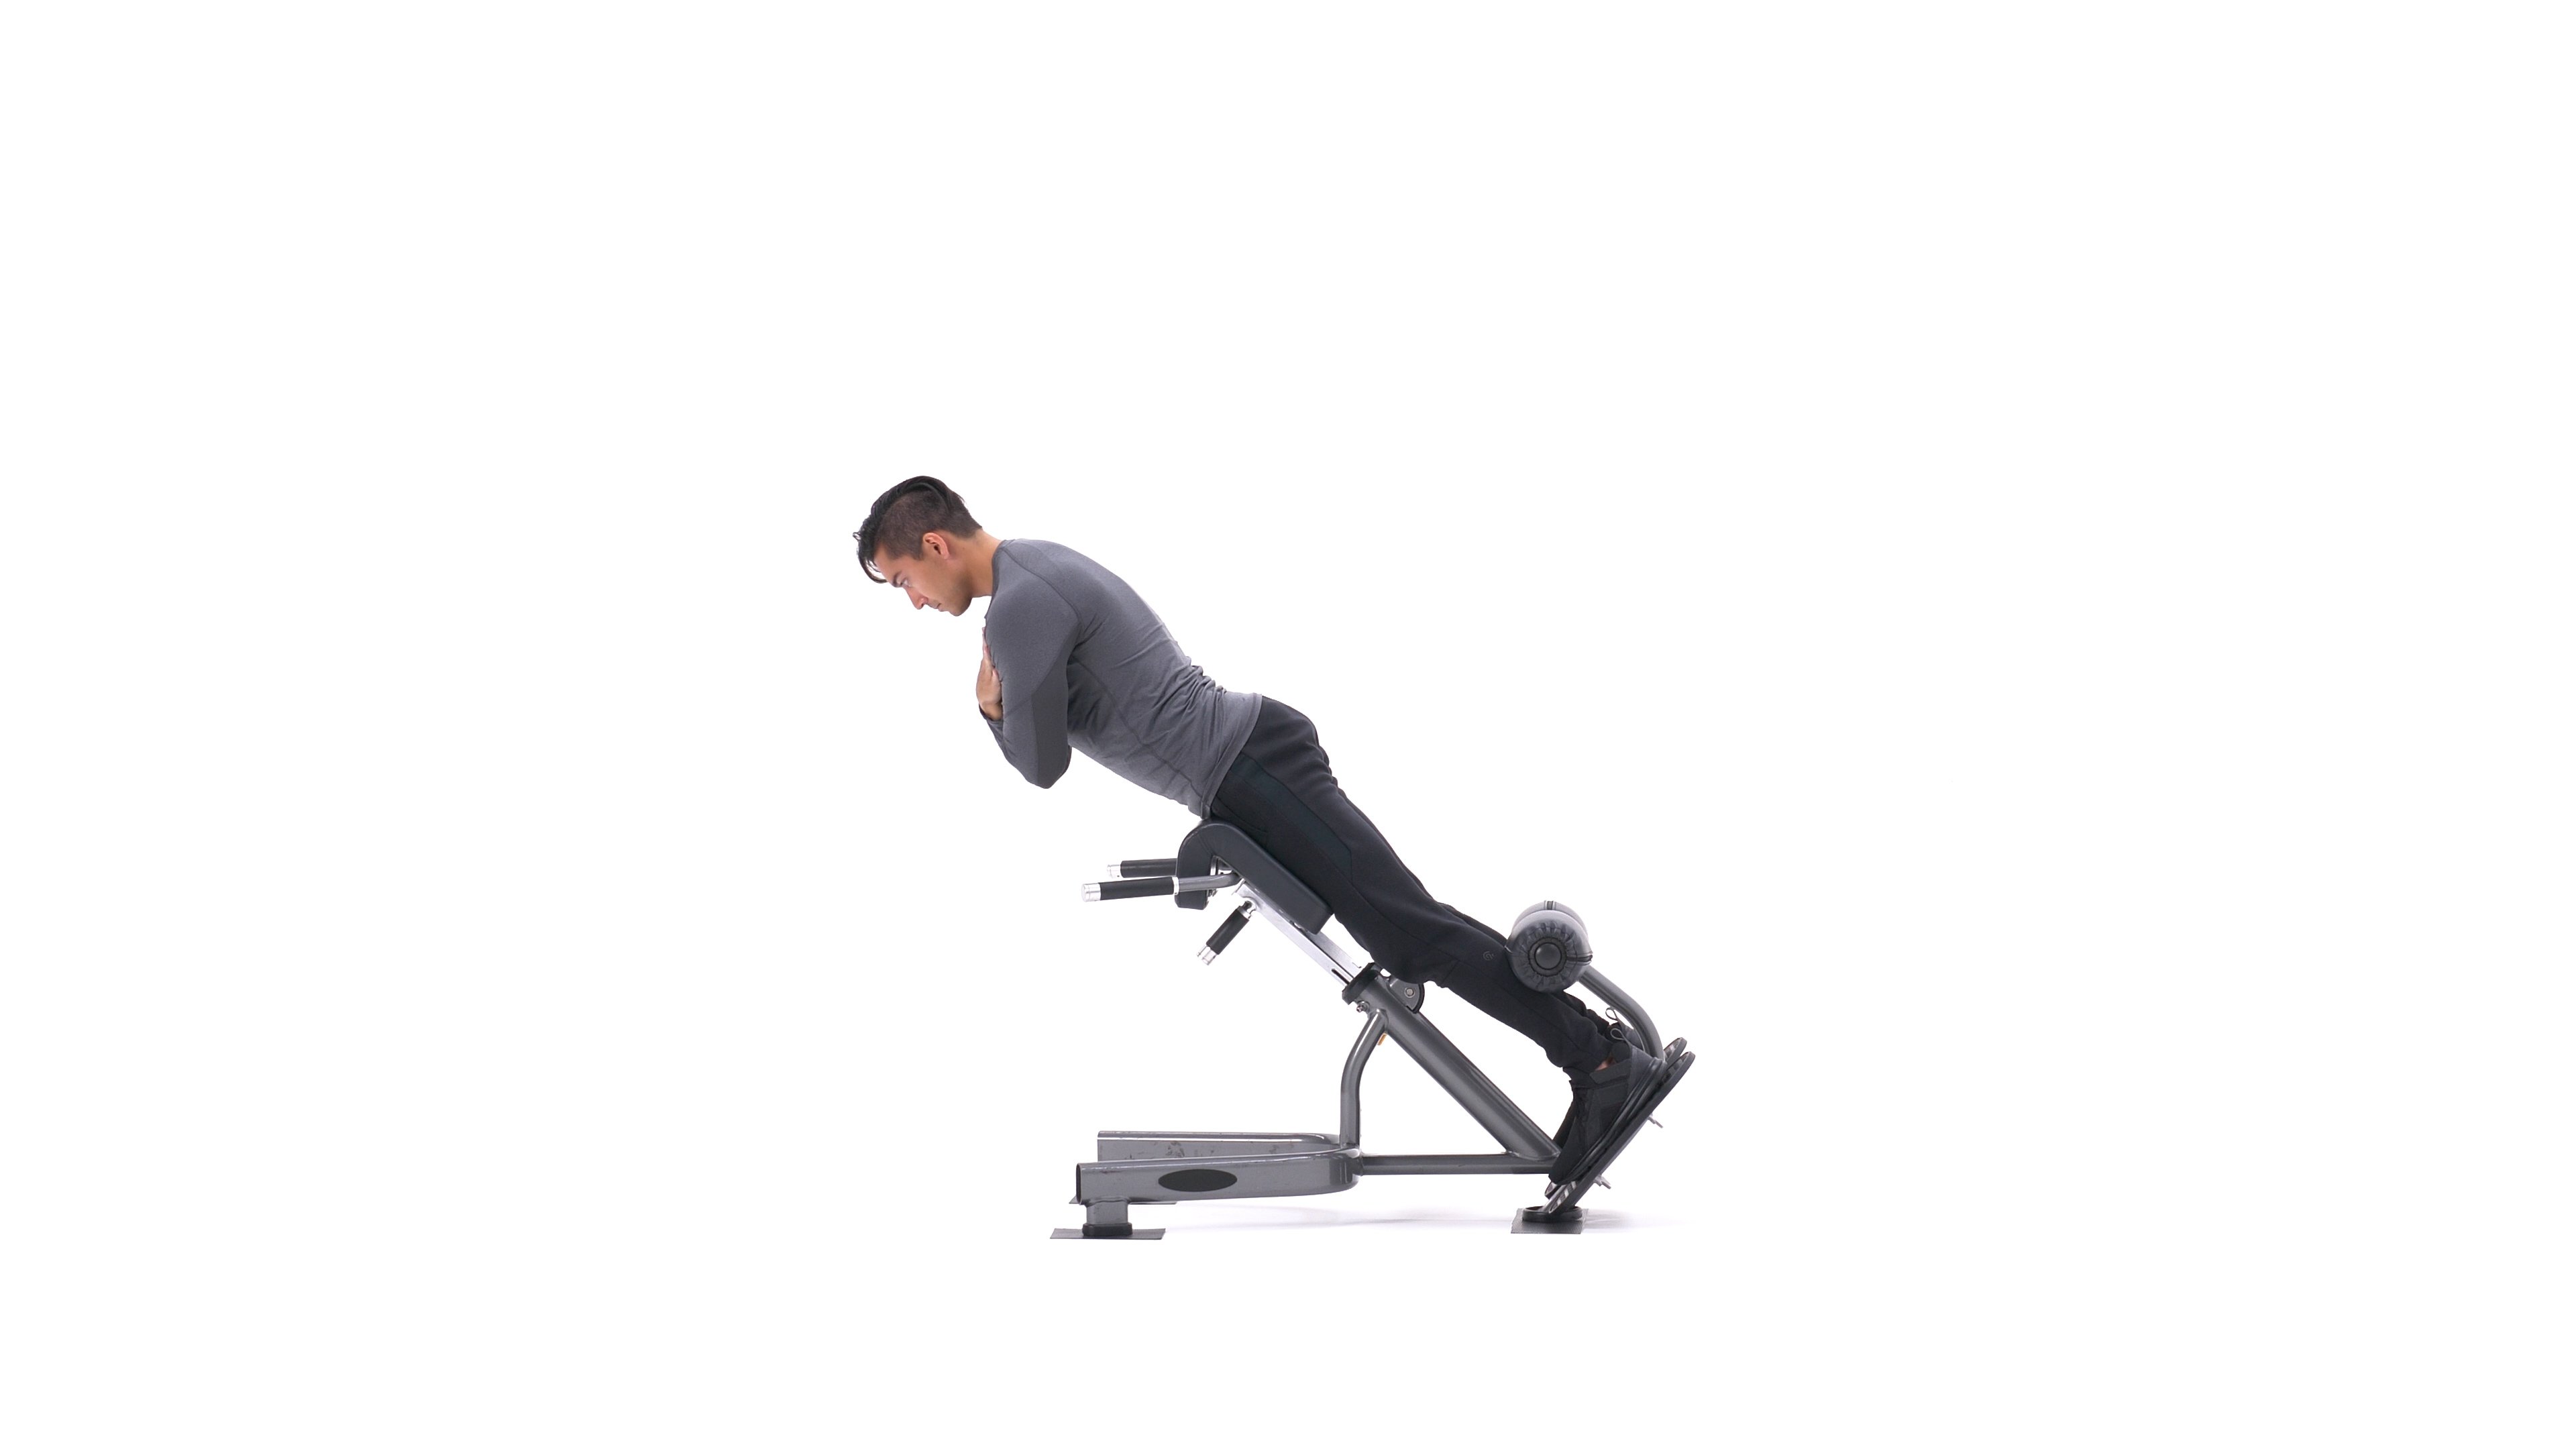 lower back extension